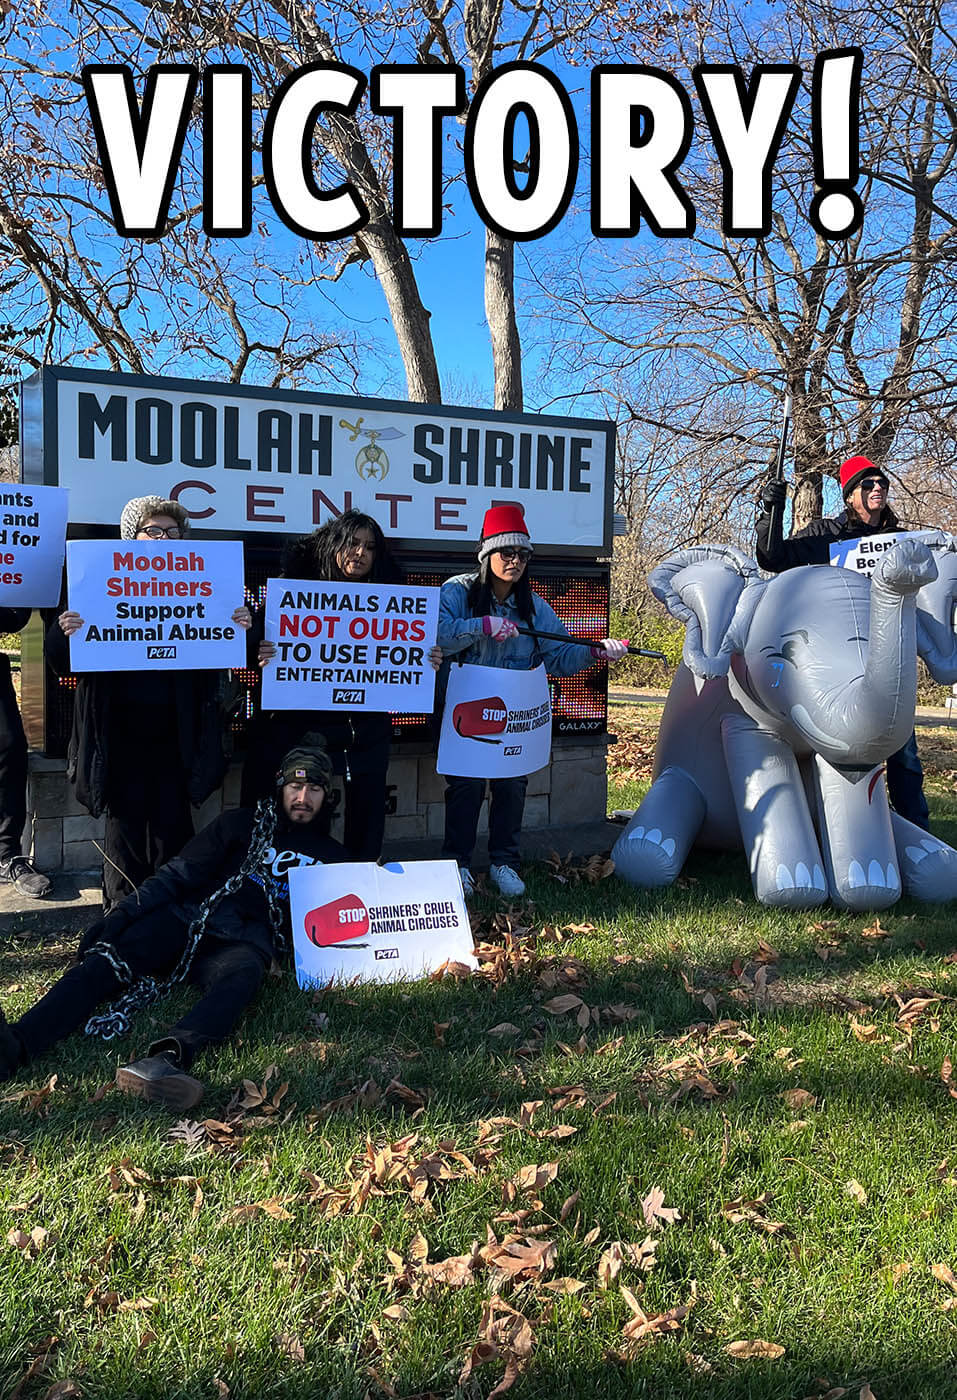 Protest in front of Moolah Shrine sign with victory text